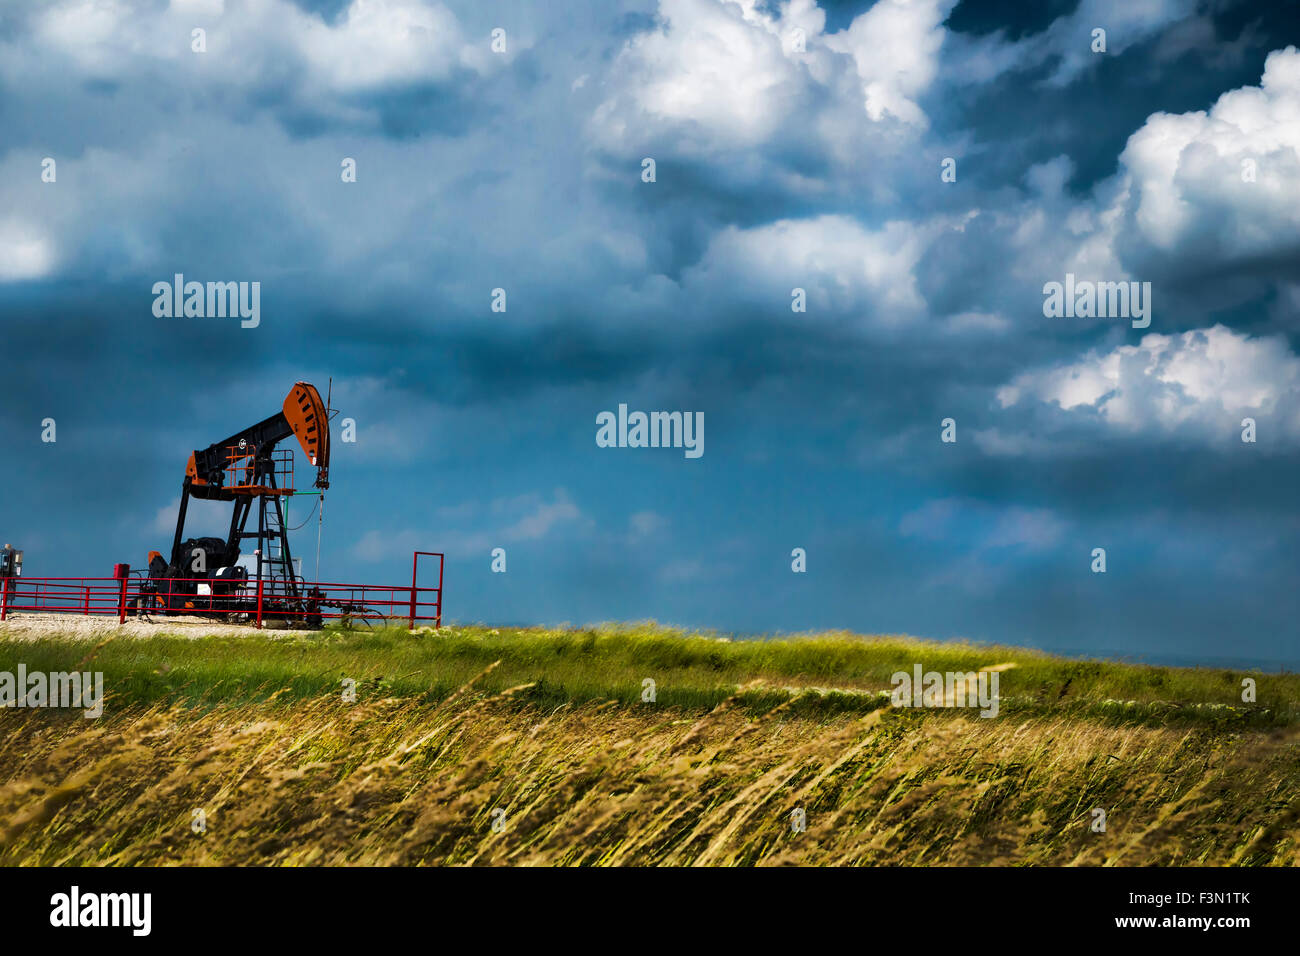 A single oil rig on the windly prairies, with stormy skies. Stock Photo